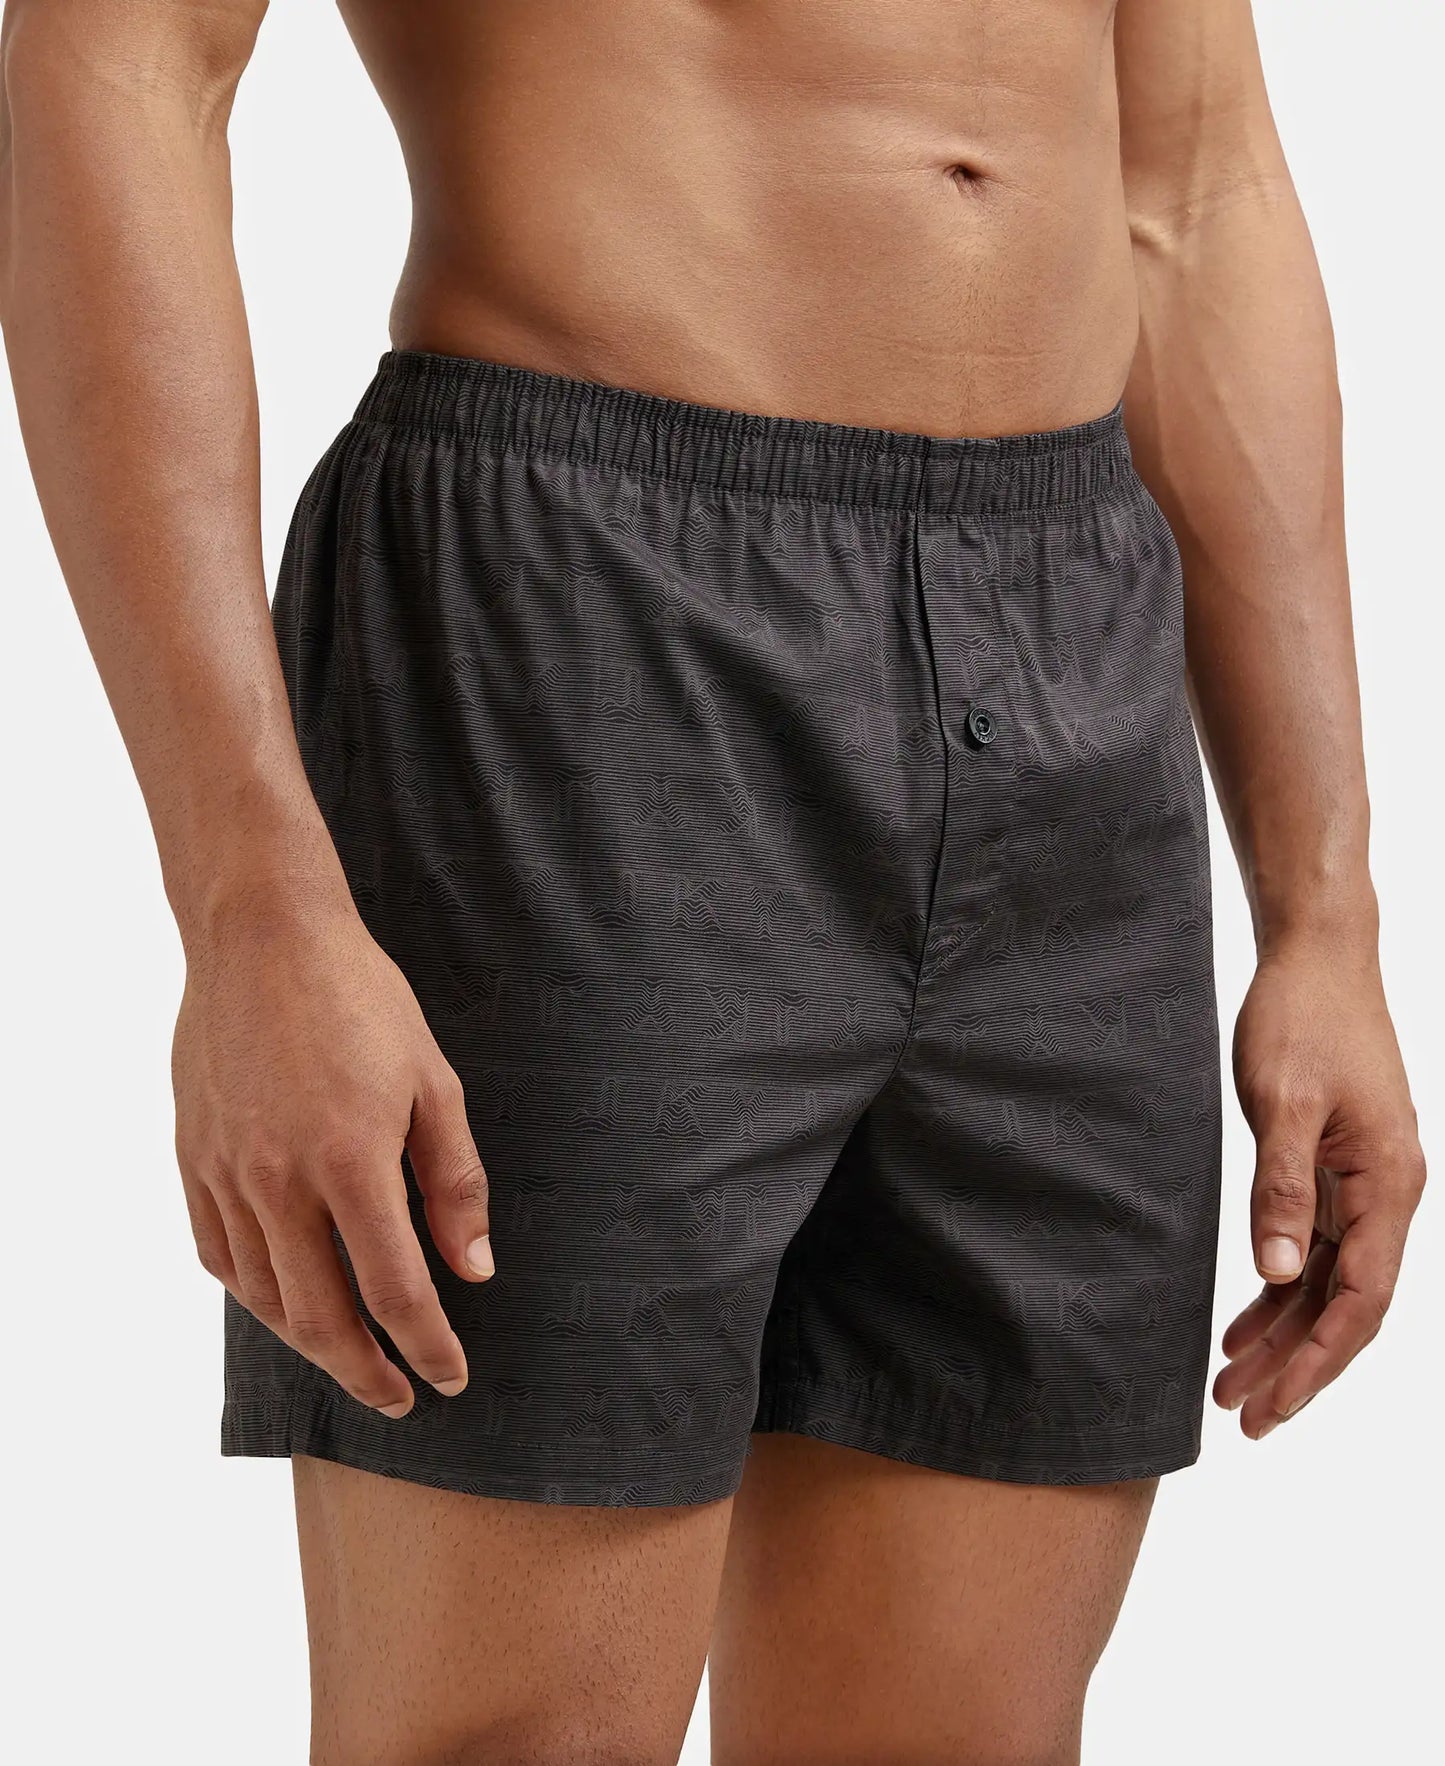 Super Combed Mercerized Cotton Woven Checkered Inner Boxers with Ultrasoft and Durable Inner Waistband - Black & Navy 2-4